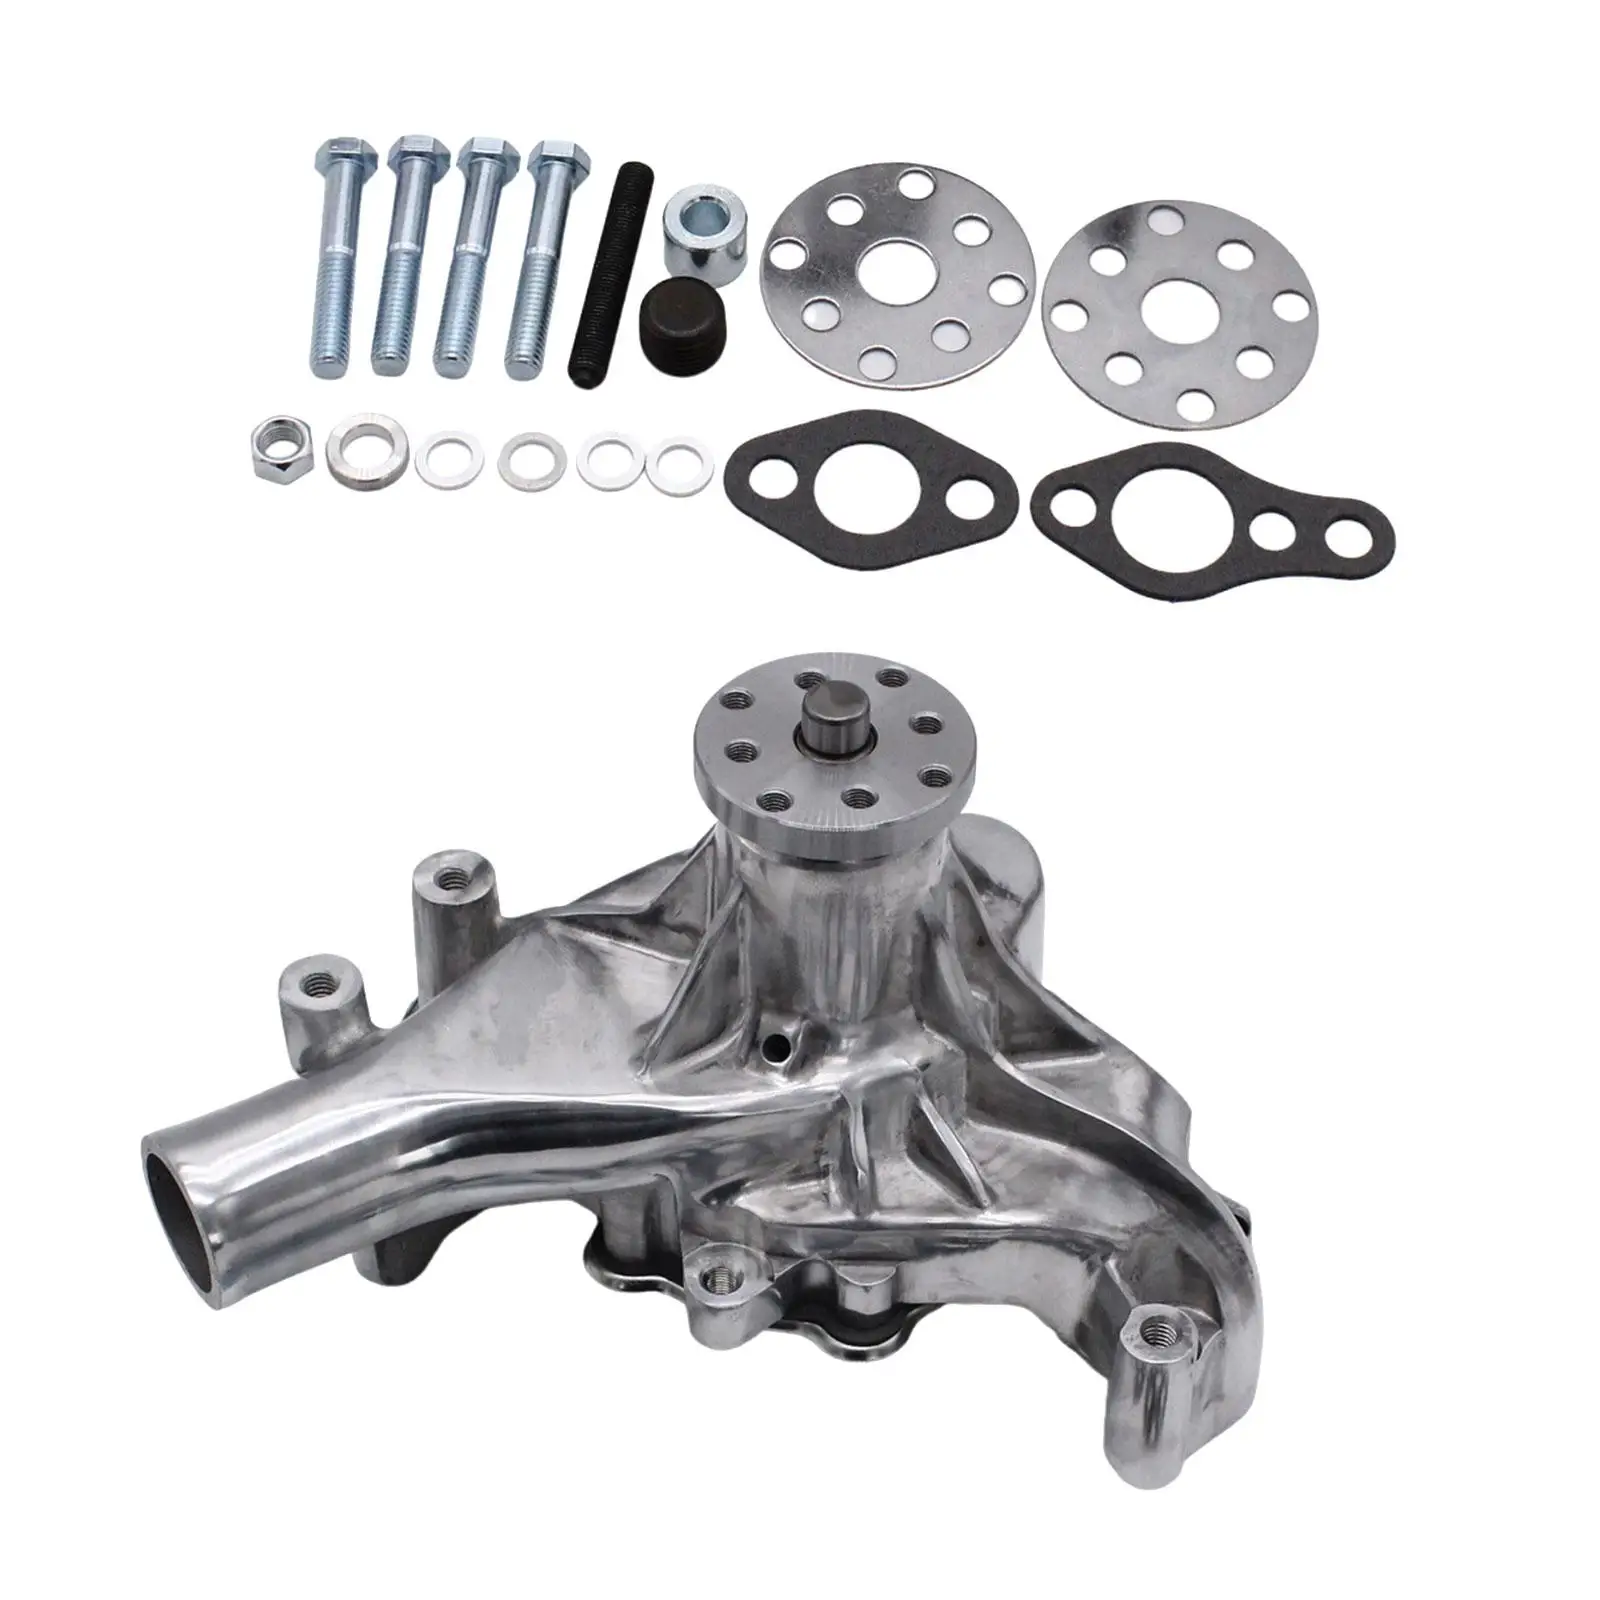 Long Water Pump High Performance Polished Easily Install Replace Parts Spare Parts Accessory for Chevy 283 327 350 383 Sbc